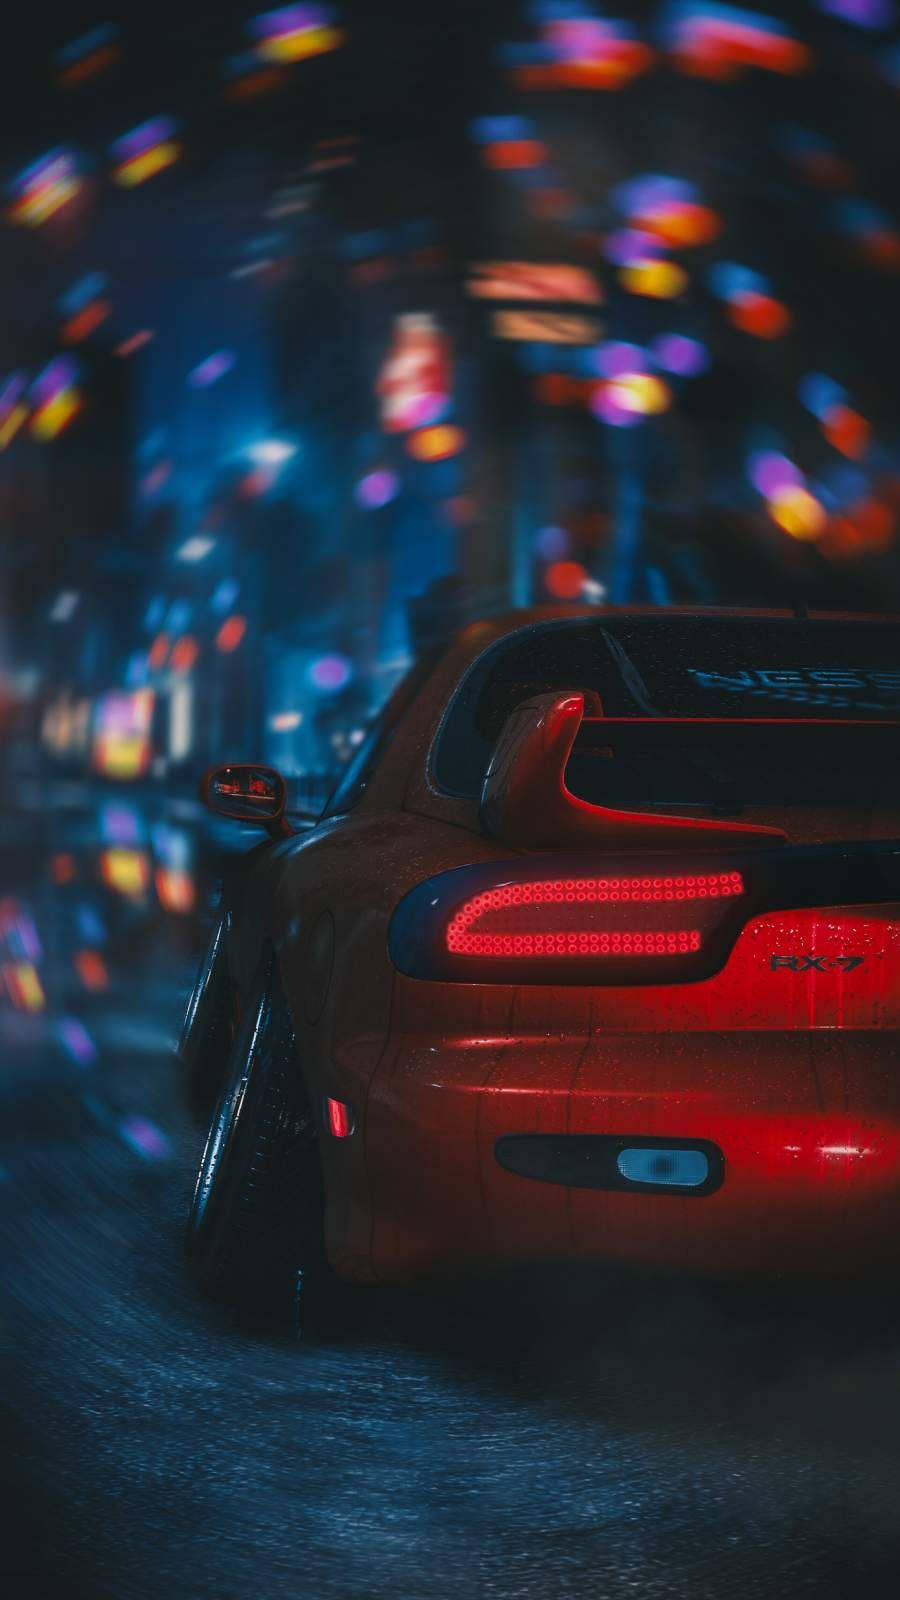 JDM Cars Aesthetic With Colorful Lights Wallpaper